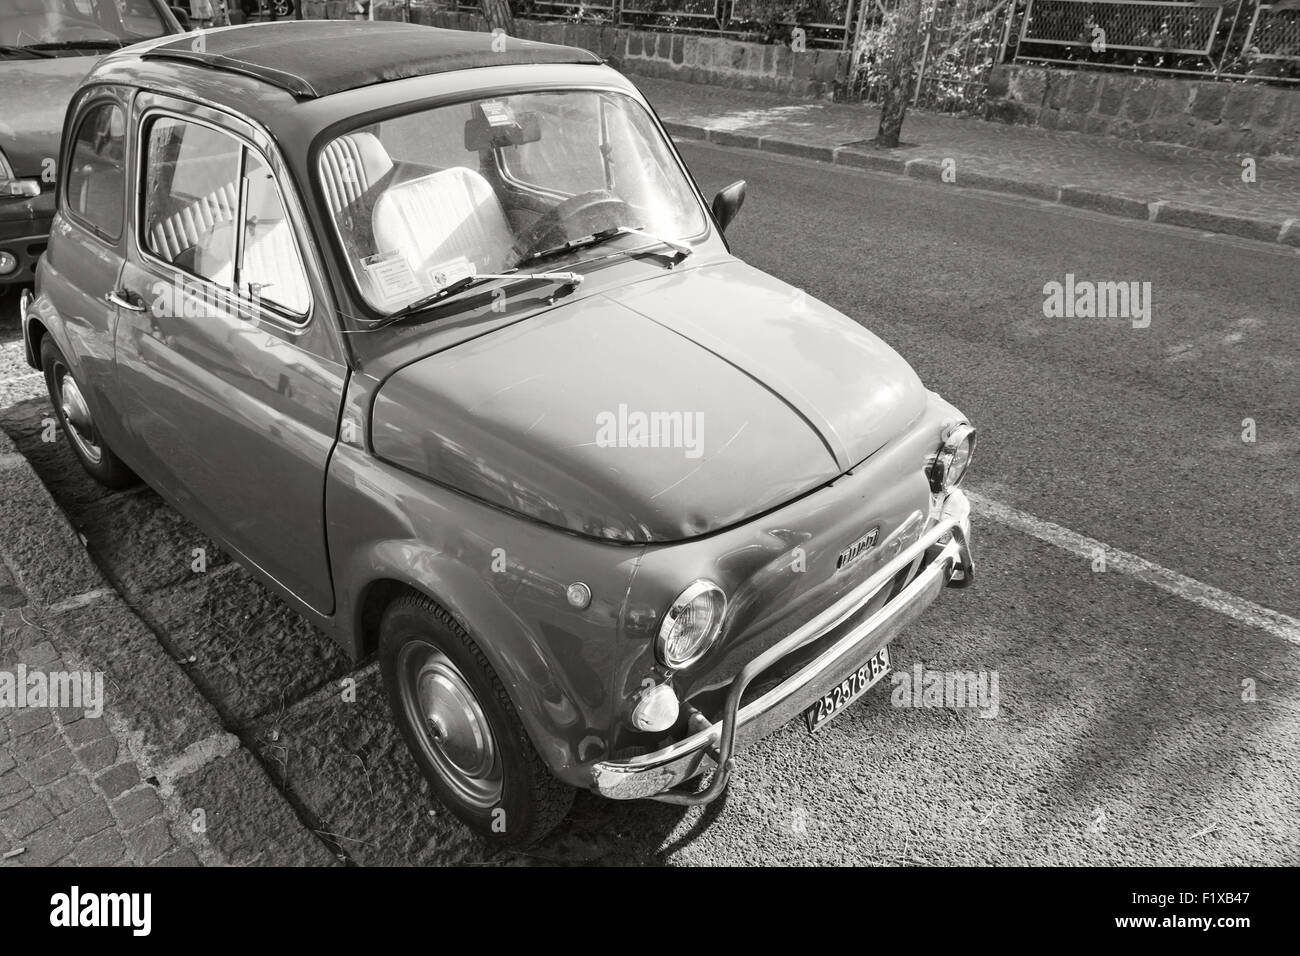 Ischia, Italy - August 15, 2015: Old Fiat 500 city car stands parked on urban roadside Stock Photo